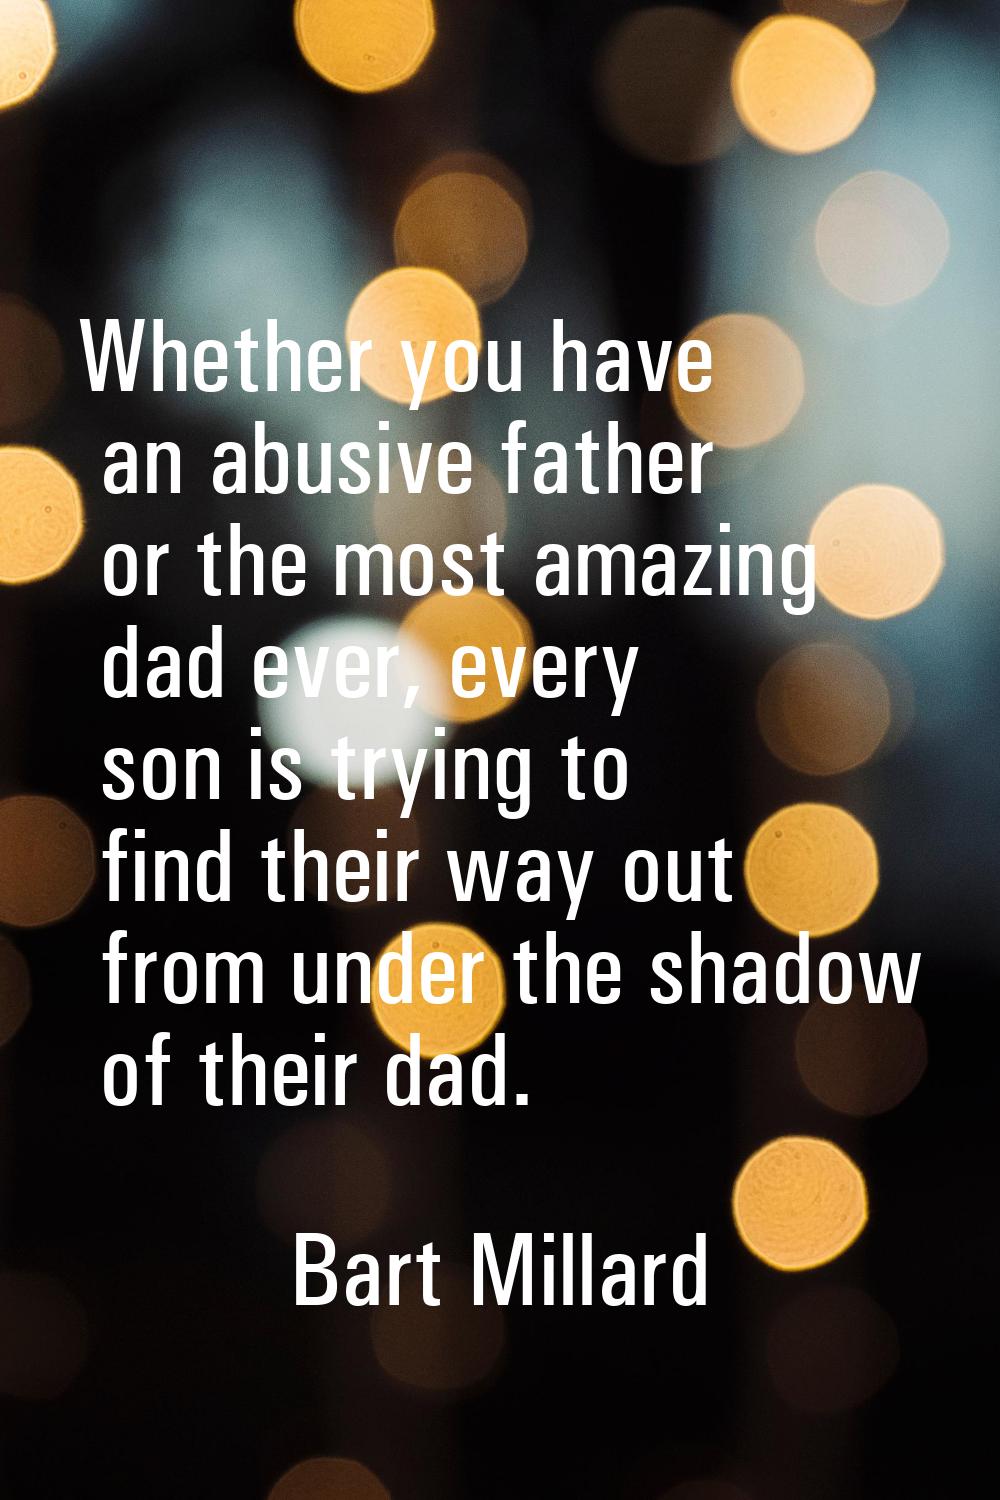 Whether you have an abusive father or the most amazing dad ever, every son is trying to find their 